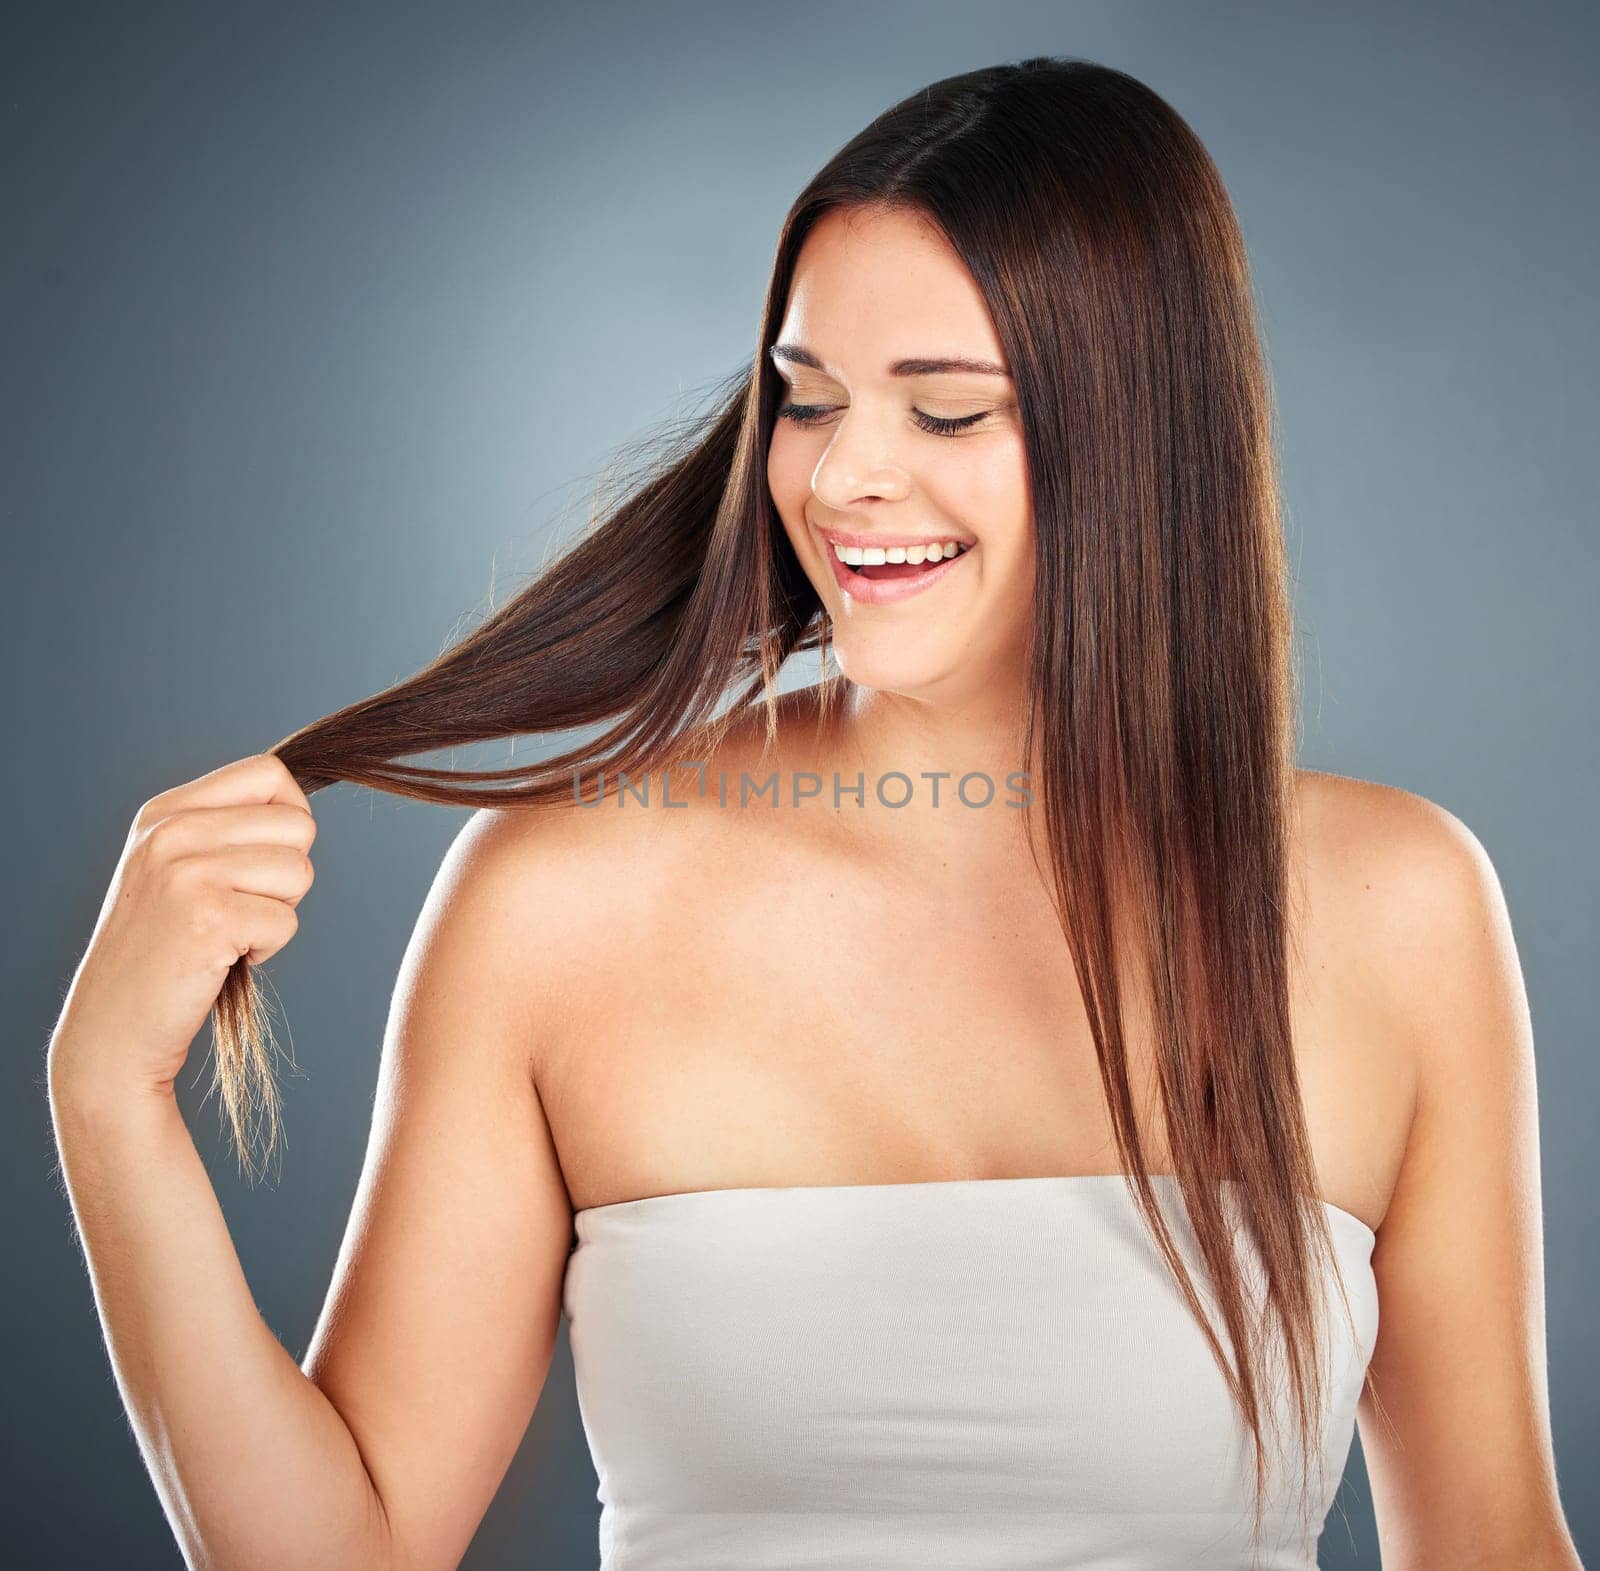 Hair care, woman and hair growth progress after keratin salon treatment with happiness. Smooth hairstyle texture of a model with extensions happy about wellness, health and hair color beauty shine.